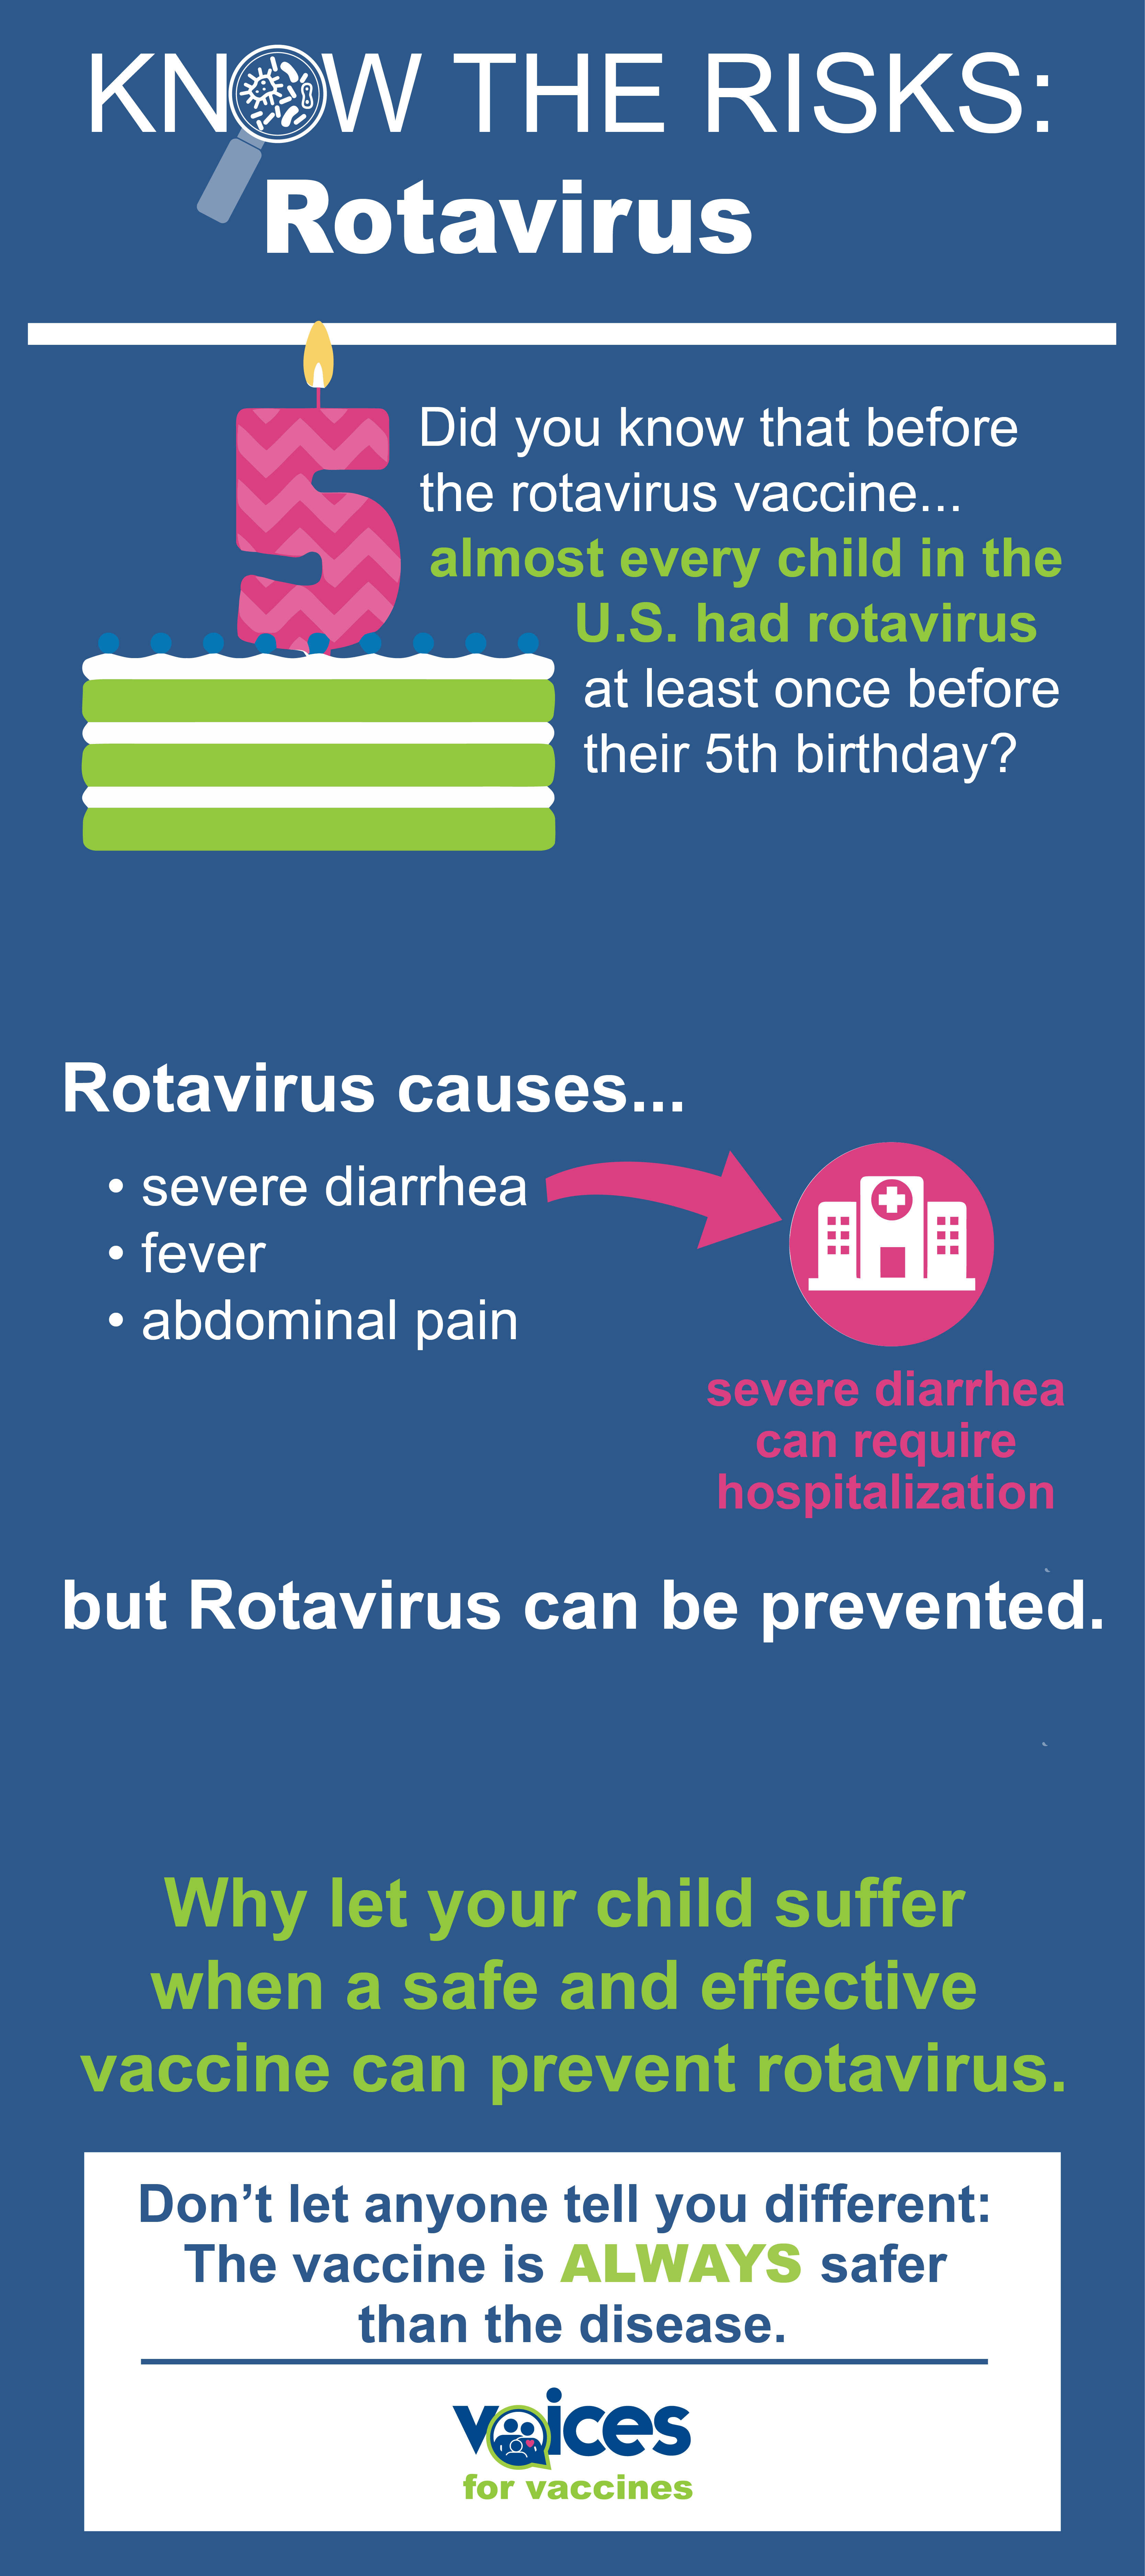 Did you know that before the rotavirus vaccine, almost every child in the U.S. had rotavirus at least once before their 5th birthday? Rotavirus causes severe diarrhea, fever, and abdominal pain but can be prevented. A child with untreated diarrhea may need hospitalization. Why let your child suffer when a safe and effective vaccine can prevent rotavirus. Don’t let anyone tell you different – the vaccine is ALWAYS safer than the disease.